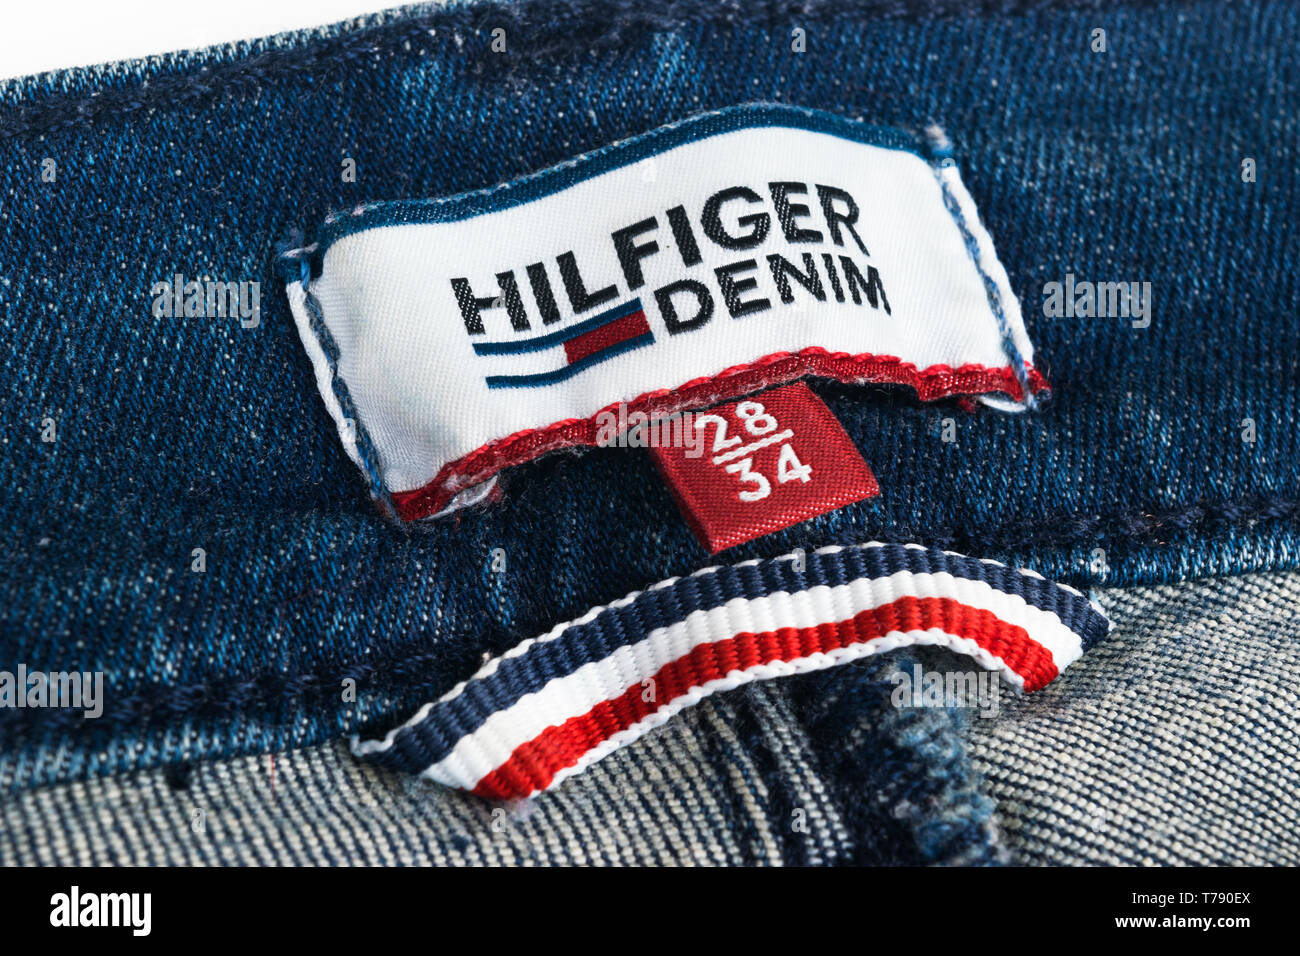 Tommy Hilfiger Jeans High Resolution Stock Photography and Images - Alamy